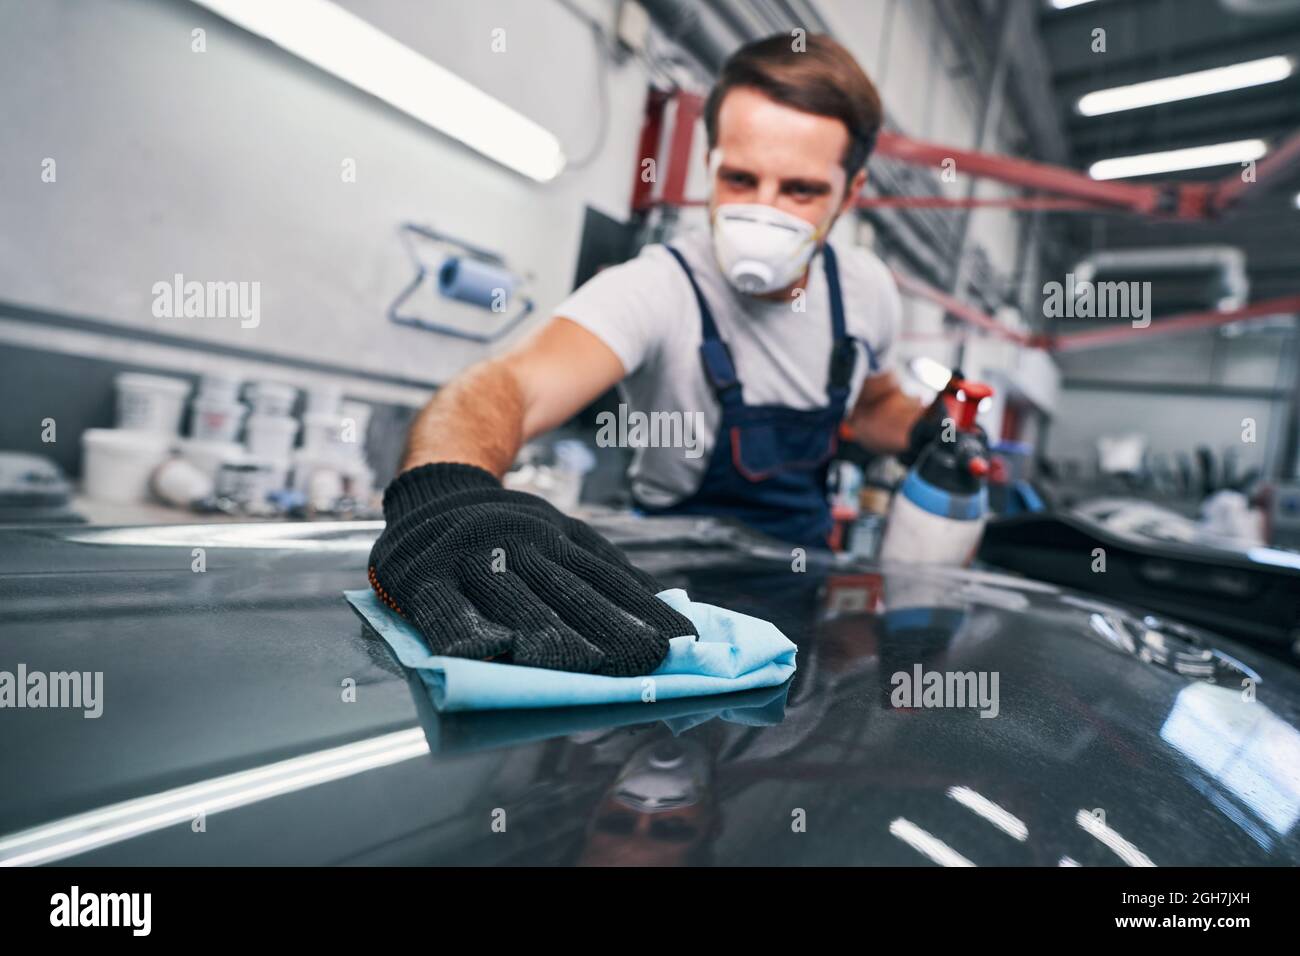 Hard-working male cleaning car in auto repair shop Stock Photo